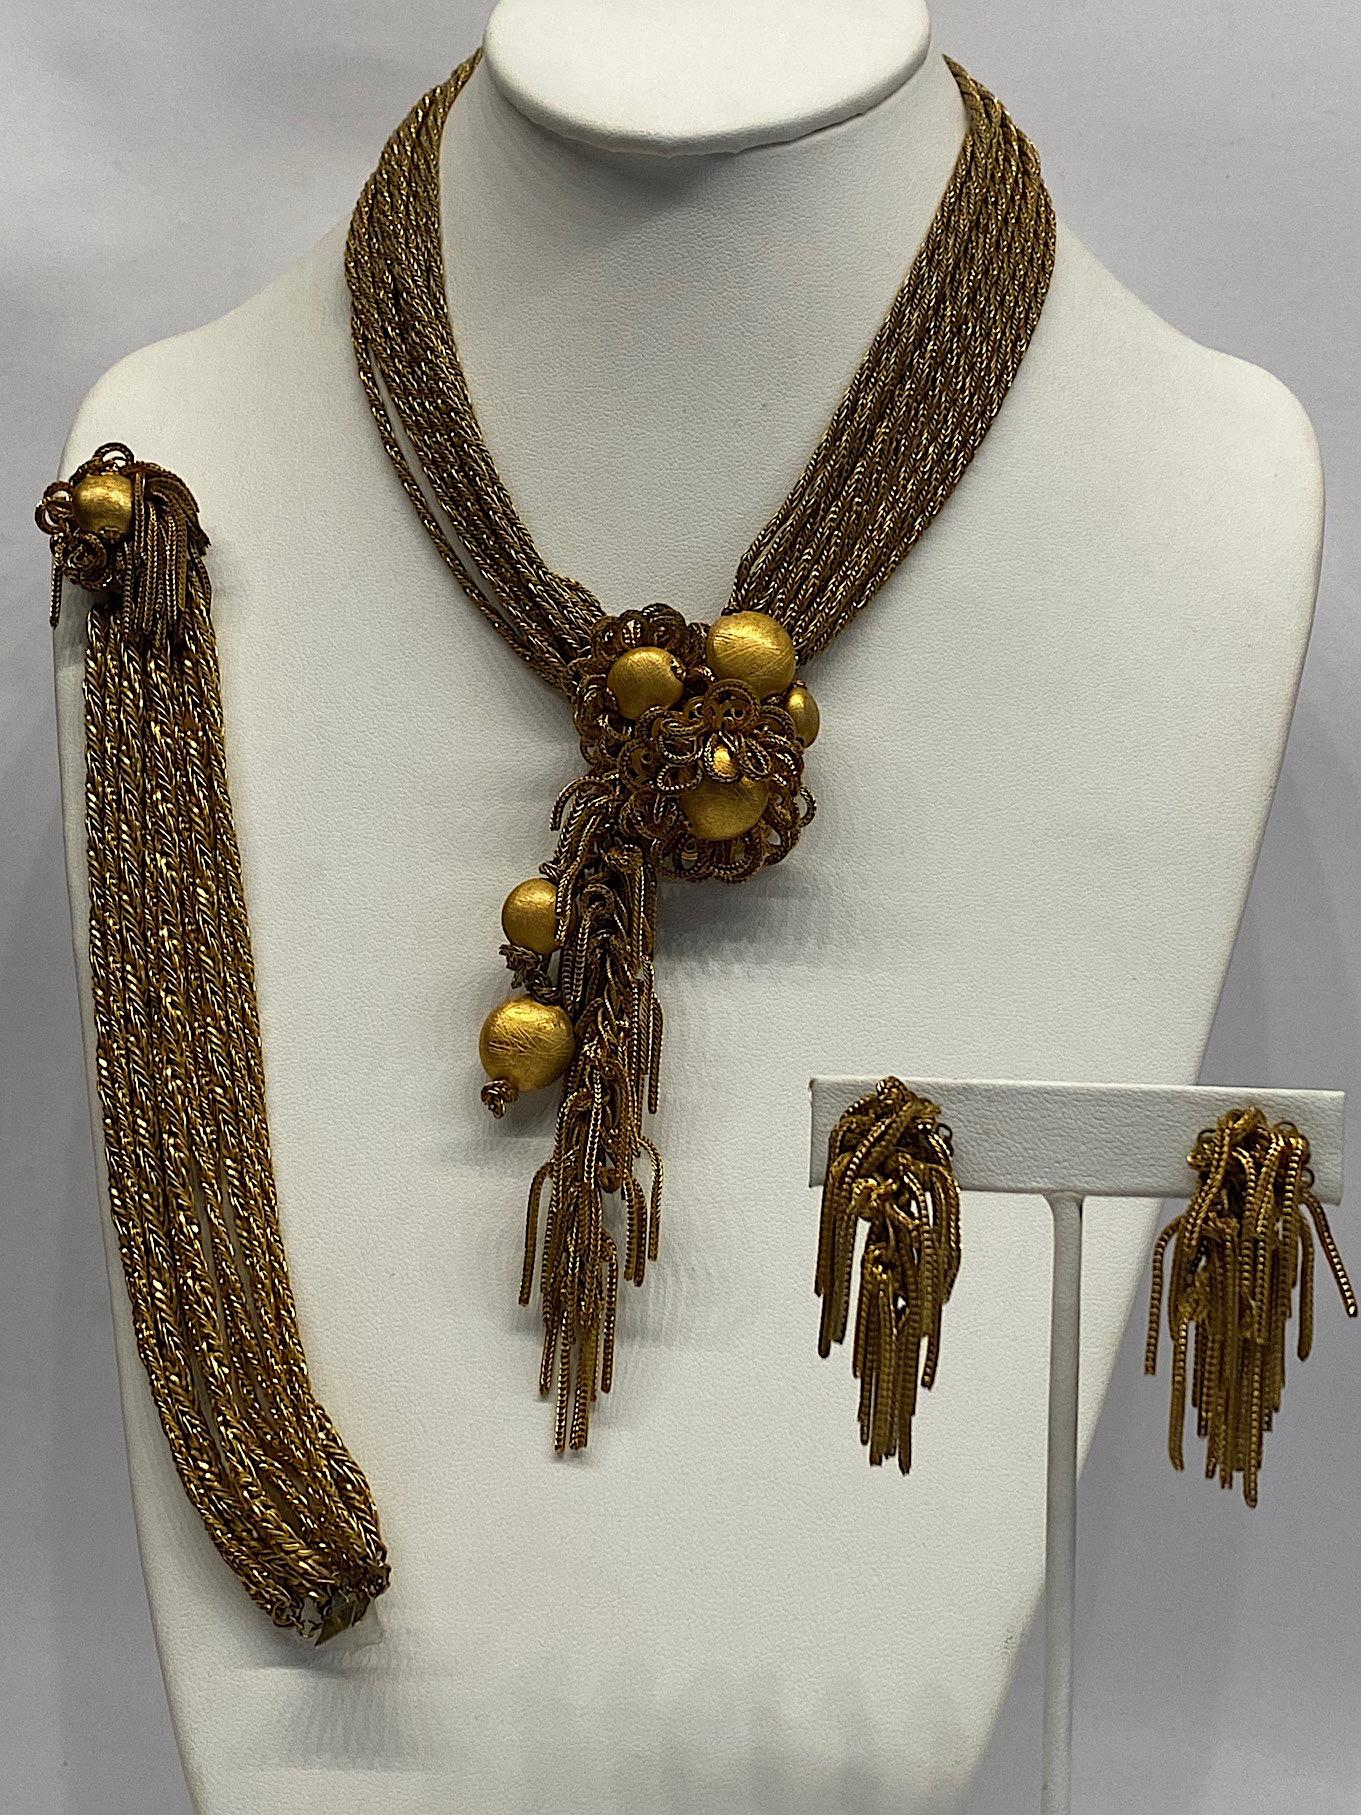 



A rare DeMario parure from the late 1940s to 1950s in an antique semi shiny and matt gold finish. The necklace and bracelet both have a dozen strands. The necklace has a central focal point of satin gold bead centered flowers with loop petals